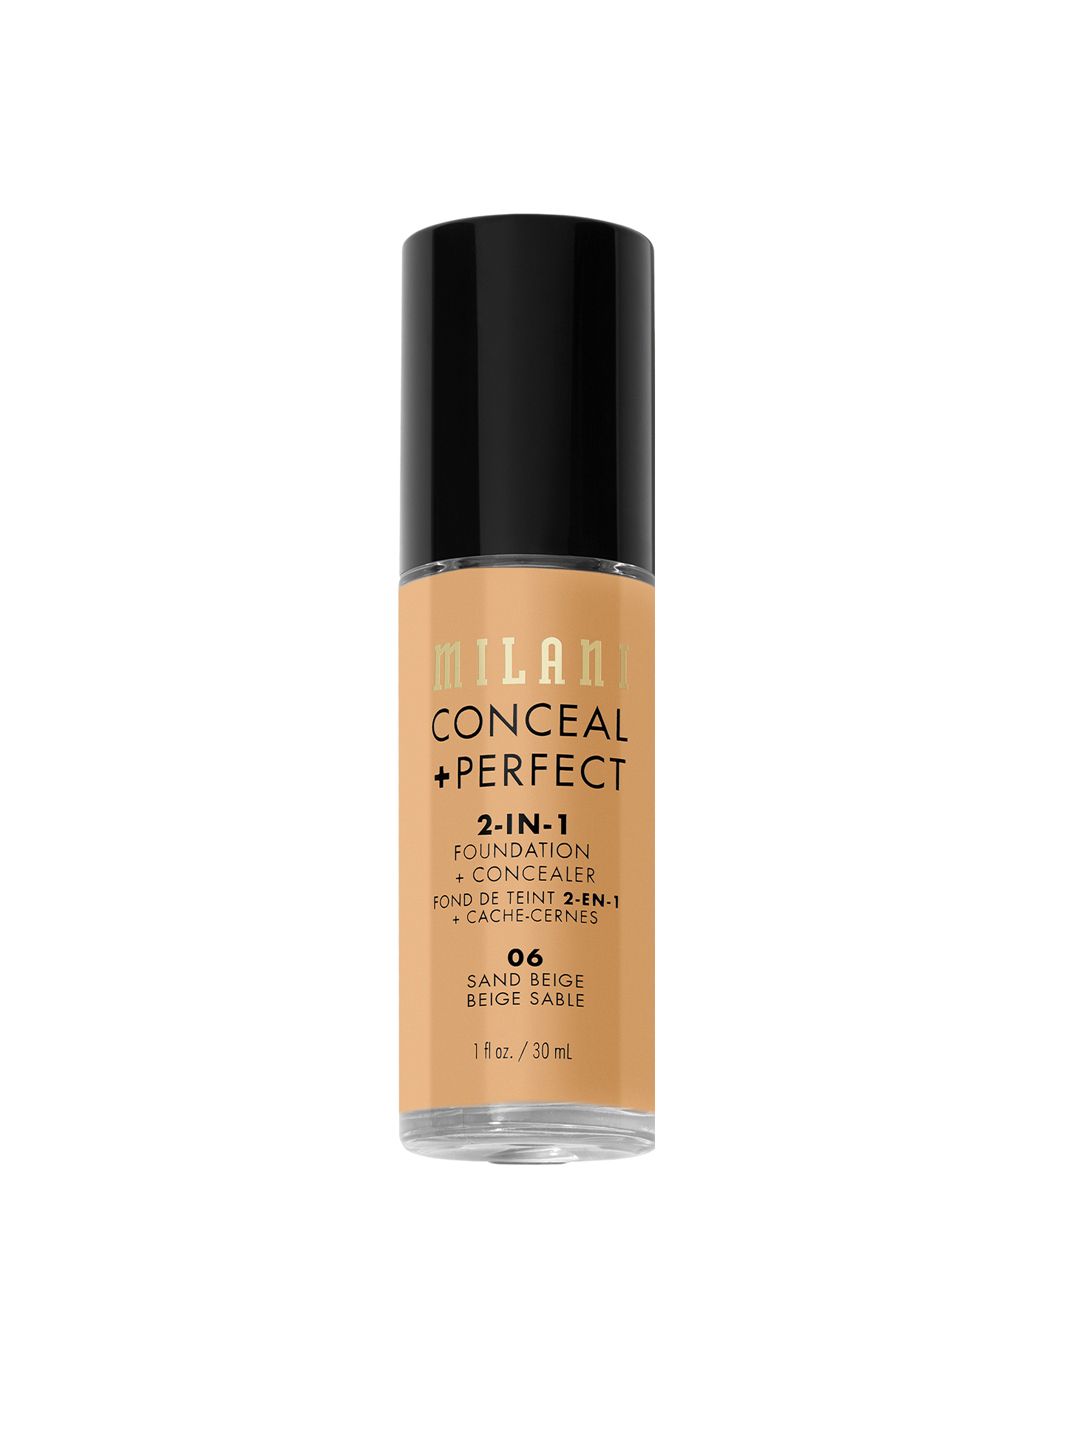 MILANI Conceal Perfect 2-in-1 Foundation & Concealer - Sand Beige 06 Price in India